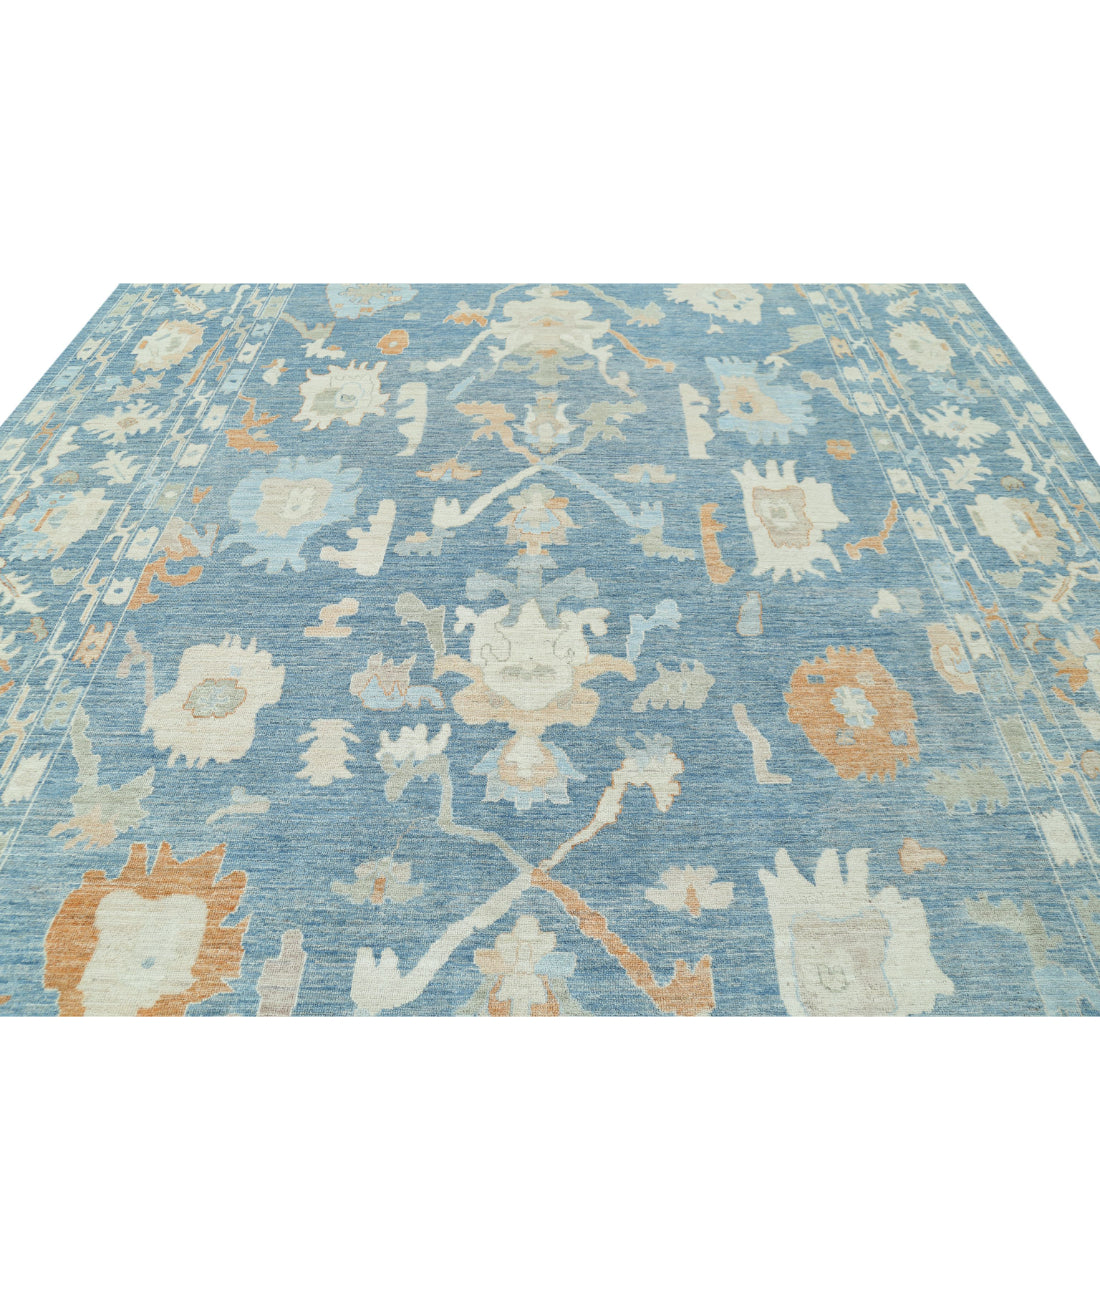 Hand Knotted Oushak Wool Rug - 10'4'' x 13'9'' 10'4'' x 13'9'' (310 X 413) / Blue / Ivory